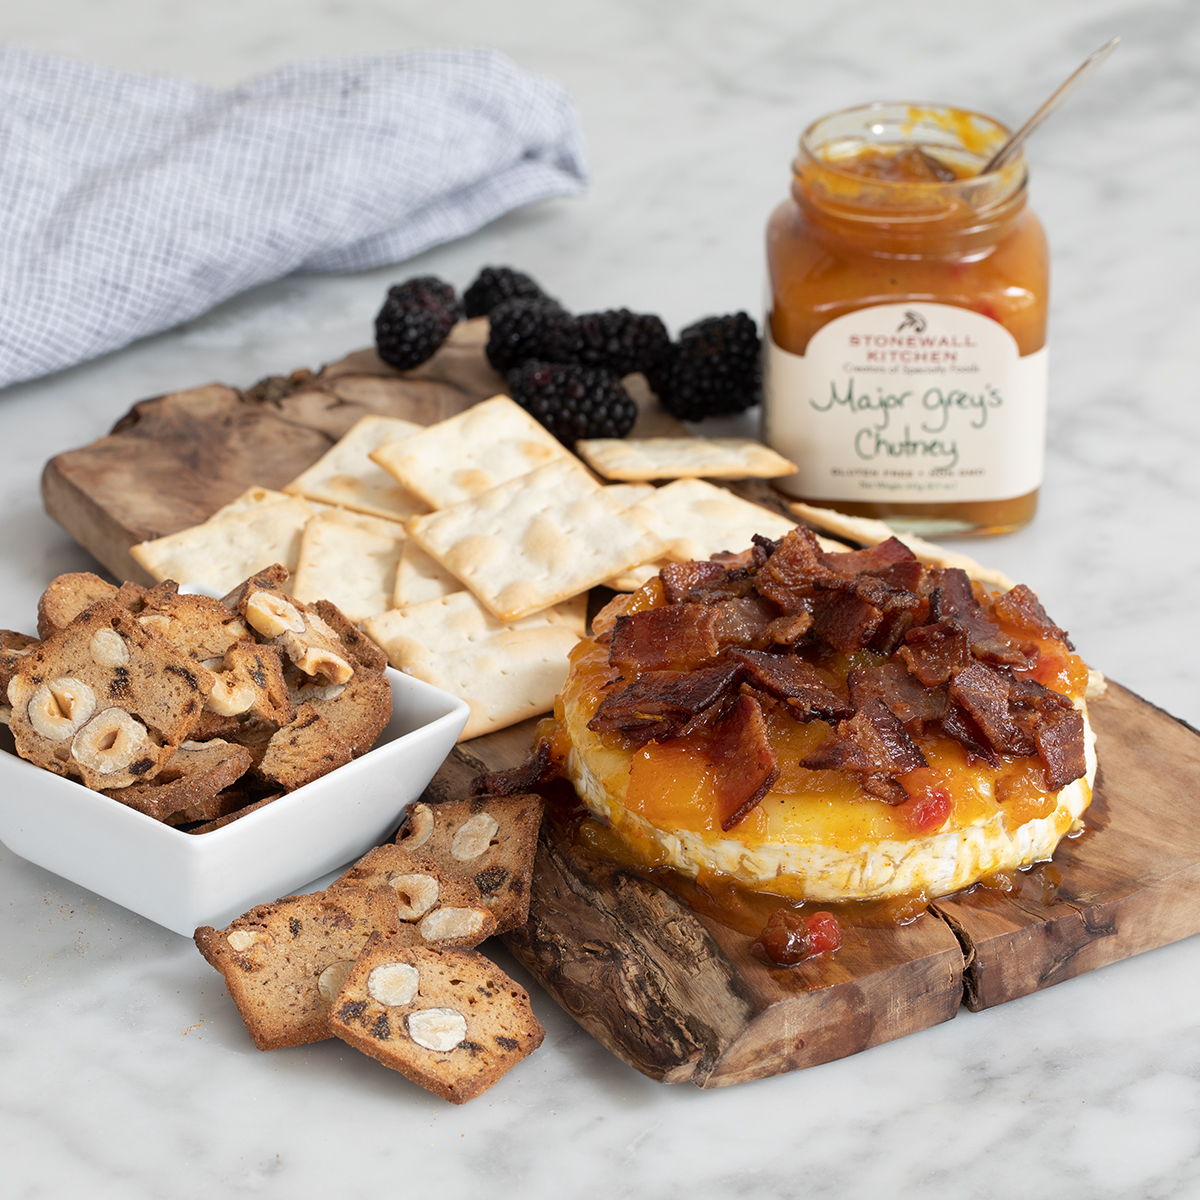 An image of a rustic serving board with a baked brie covered in chutney and bacon pieces flanked by crackers, berries and an open jar of chutney, all on a light gray granite countertop.